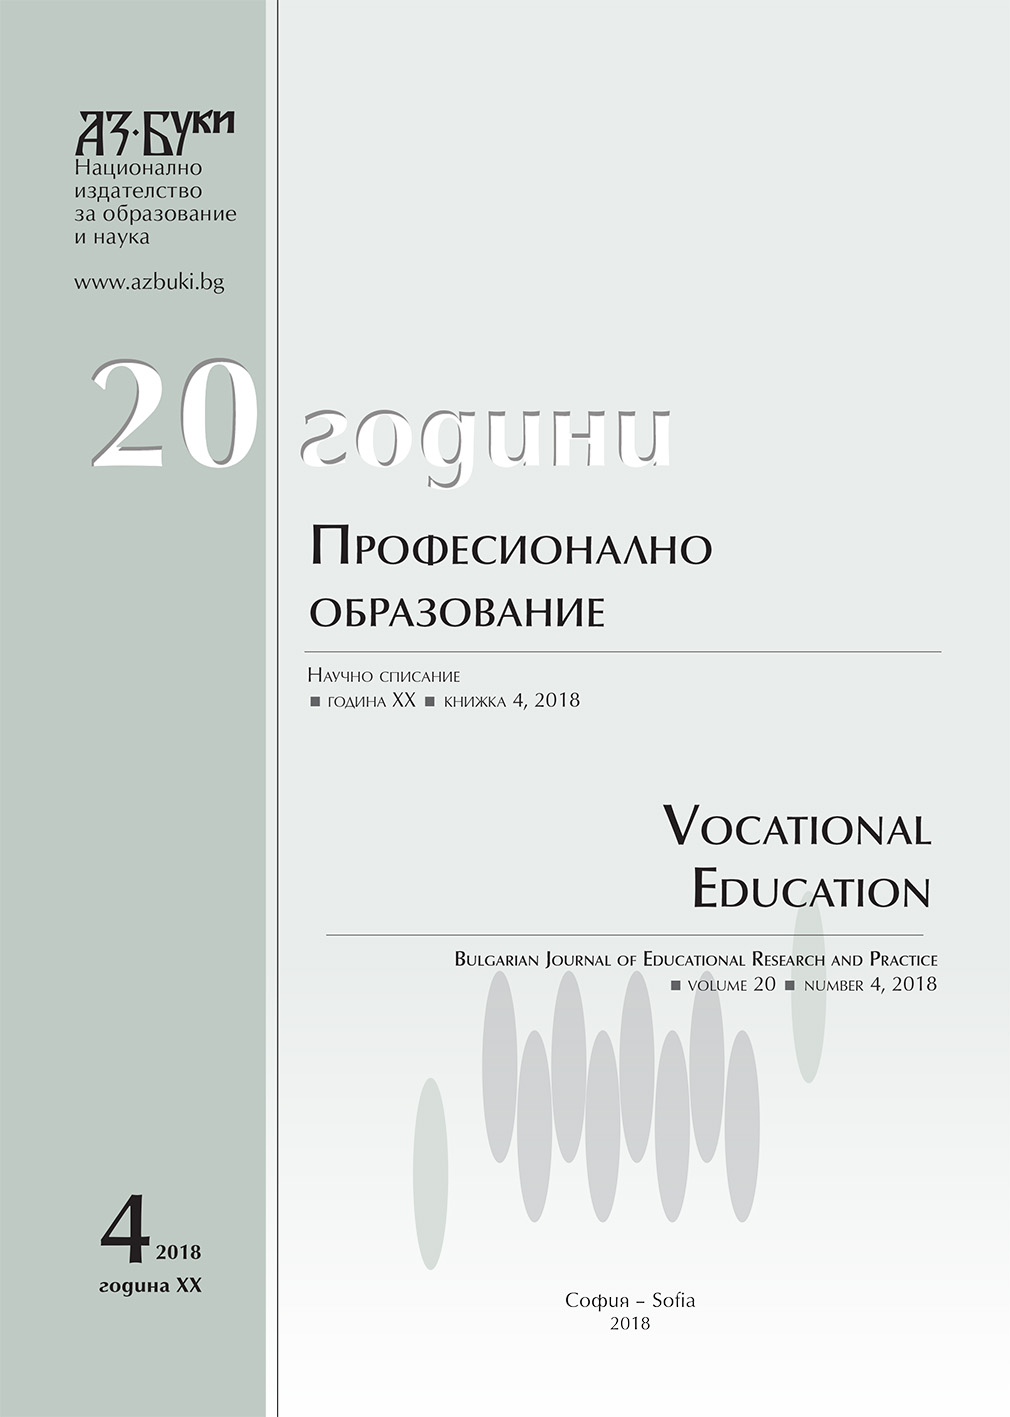 Impact Assessment of Active Labour Market Policy on an Individual Level in Bulgaria: a Review of the Assessments Made and Lessons Learned Cover Image